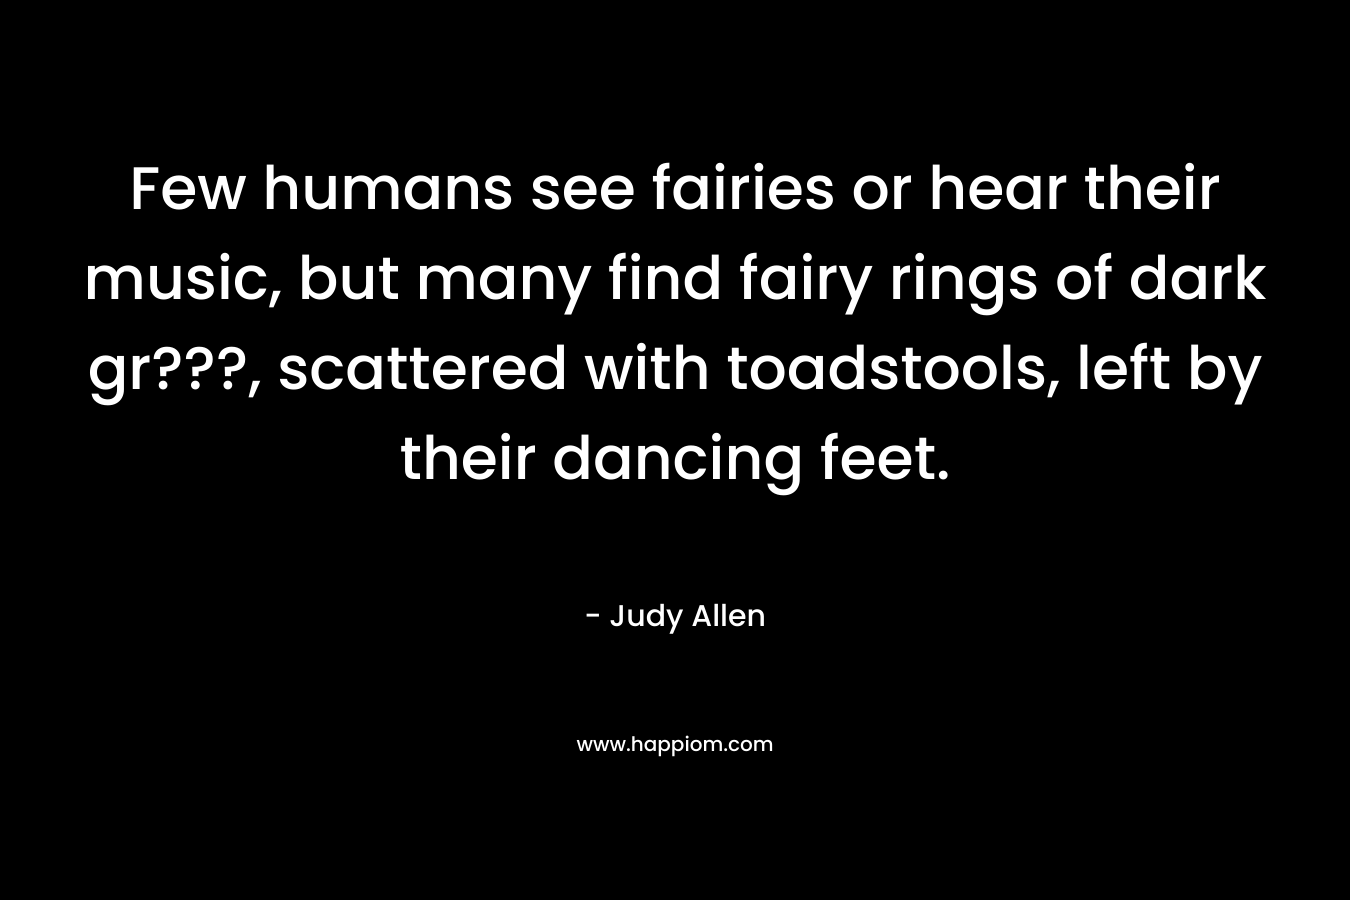 Few humans see fairies or hear their music, but many find fairy rings of dark gr???, scattered with toadstools, left by their dancing feet. – Judy Allen